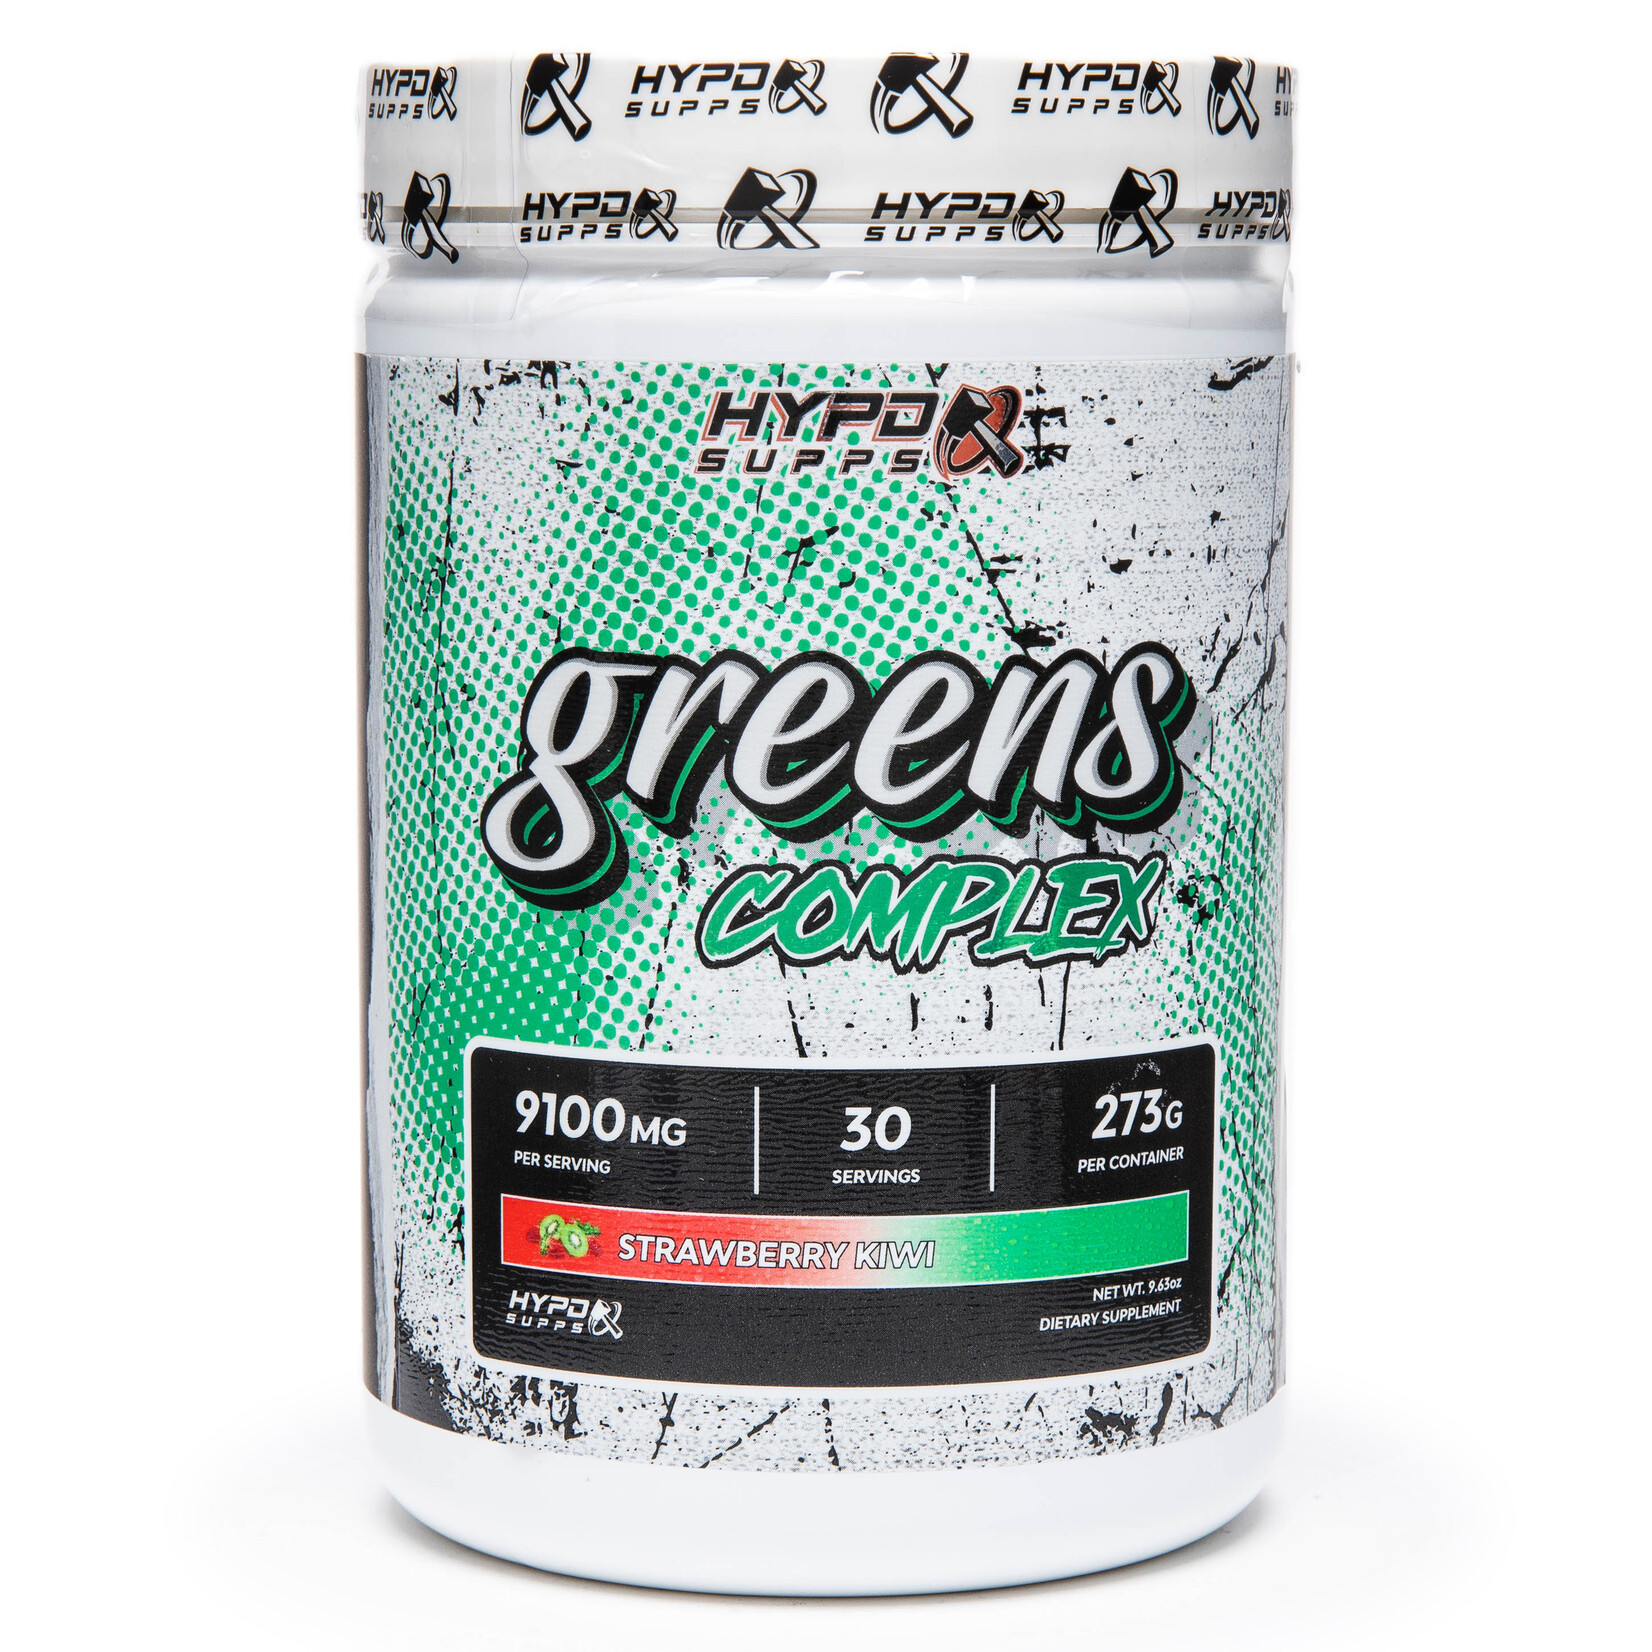 HYPD Supps Greens Complex